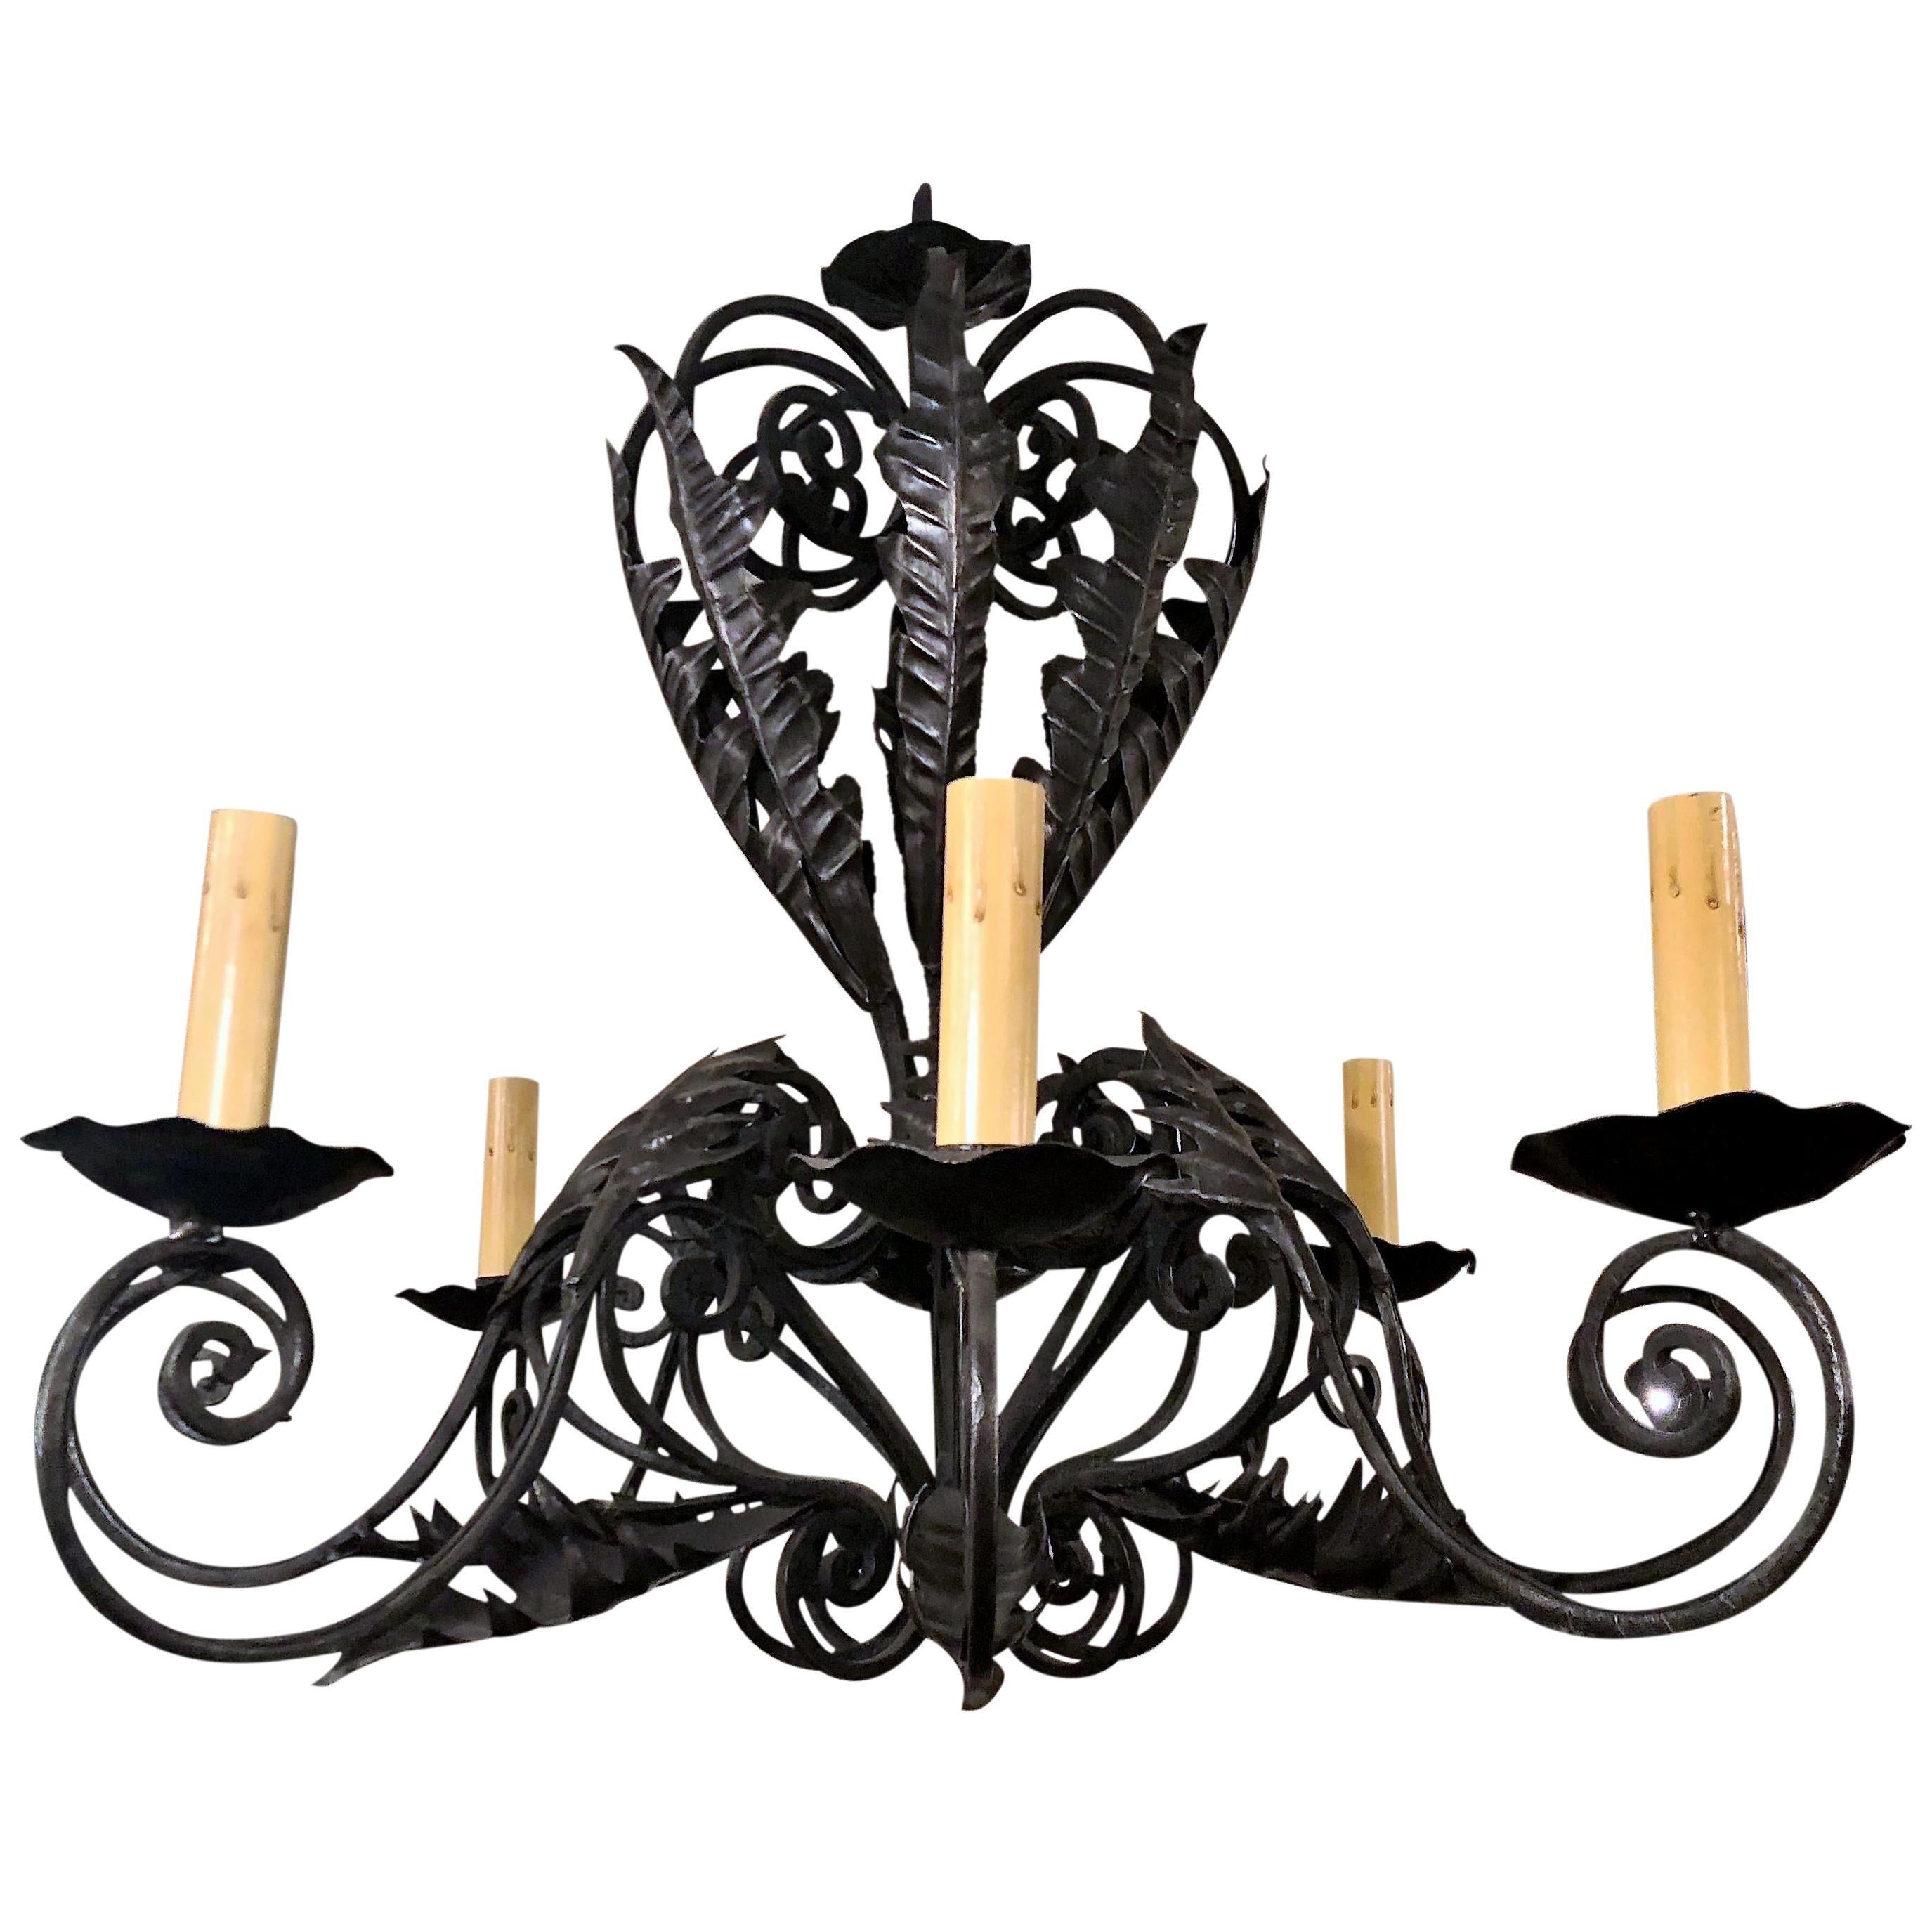 Antique English Wrought Iron Chandelier